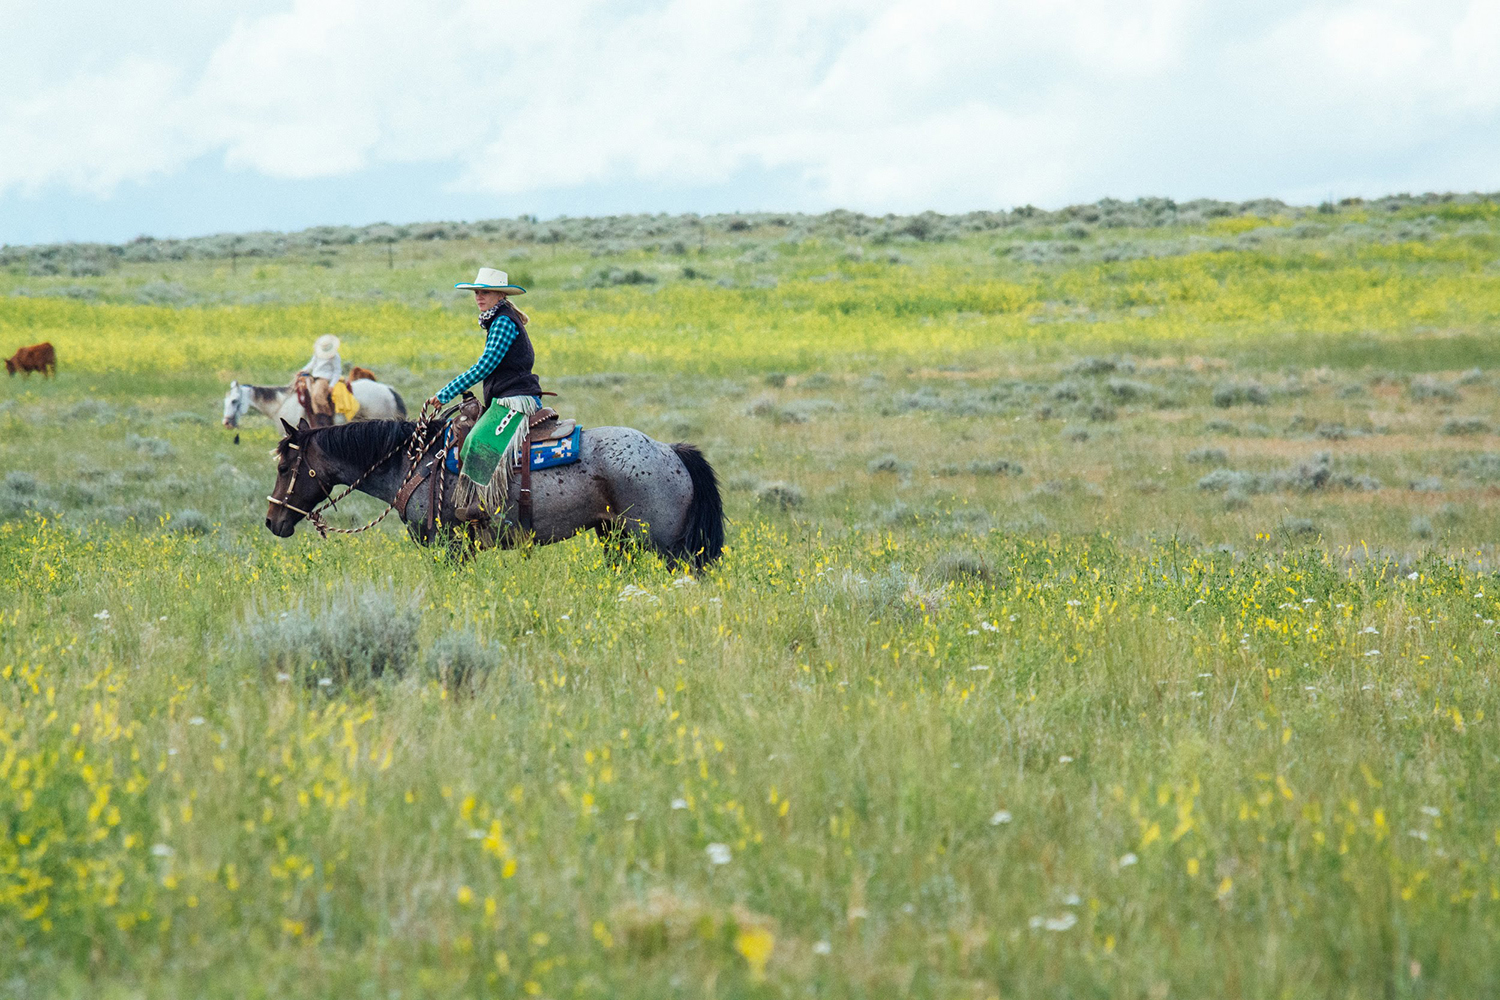 Young woman riding horseback on the range moving cattle.